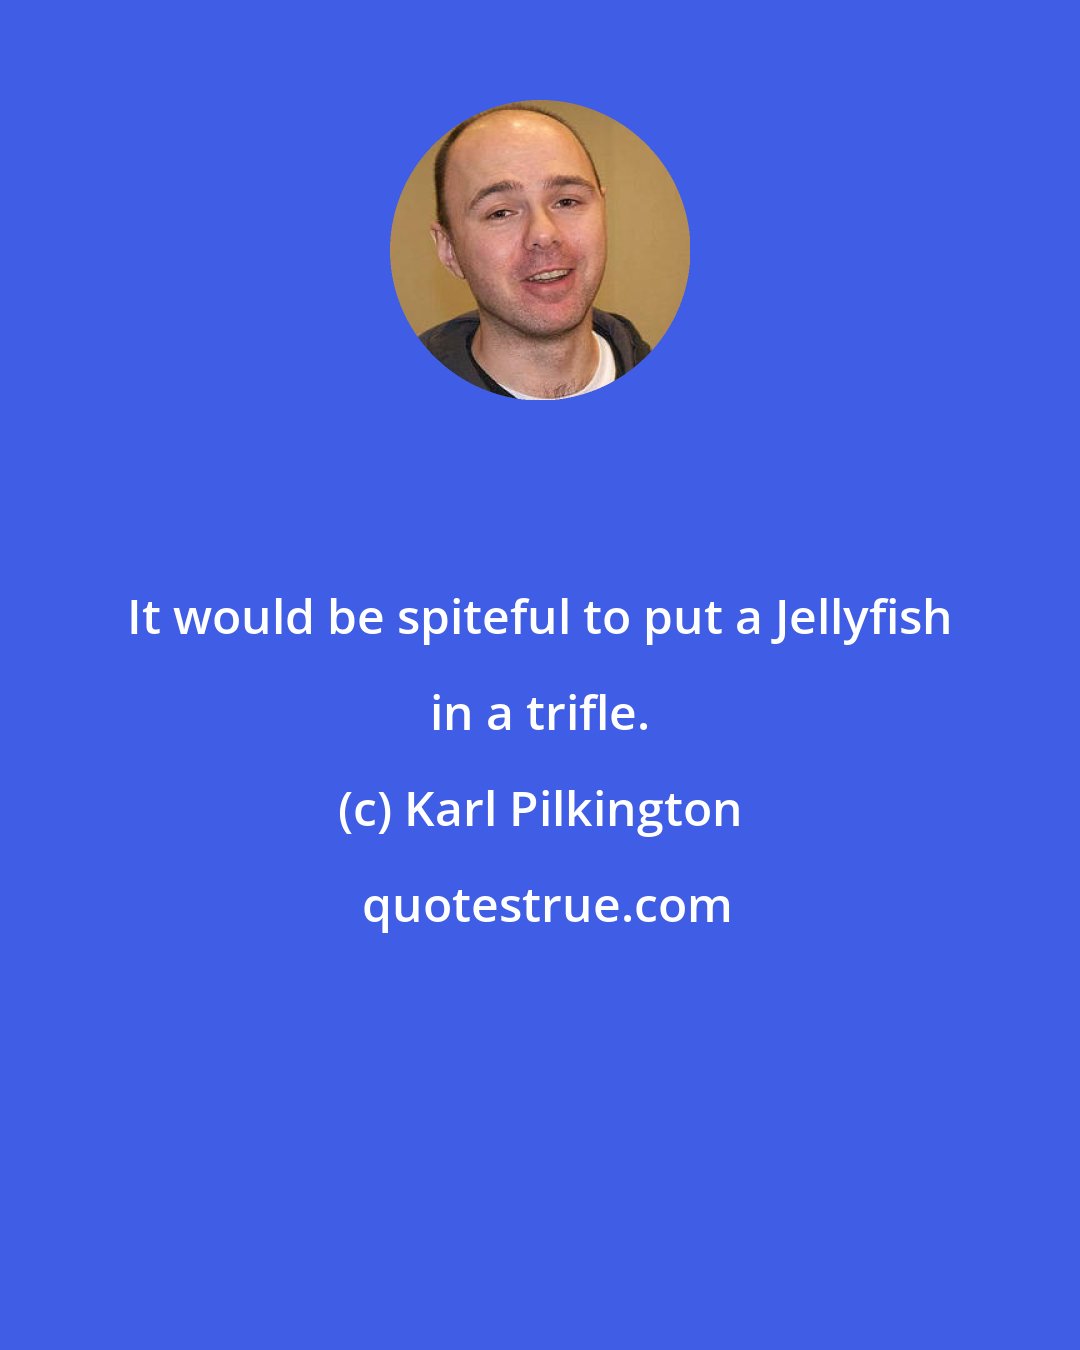 Karl Pilkington: It would be spiteful to put a Jellyfish in a trifle.